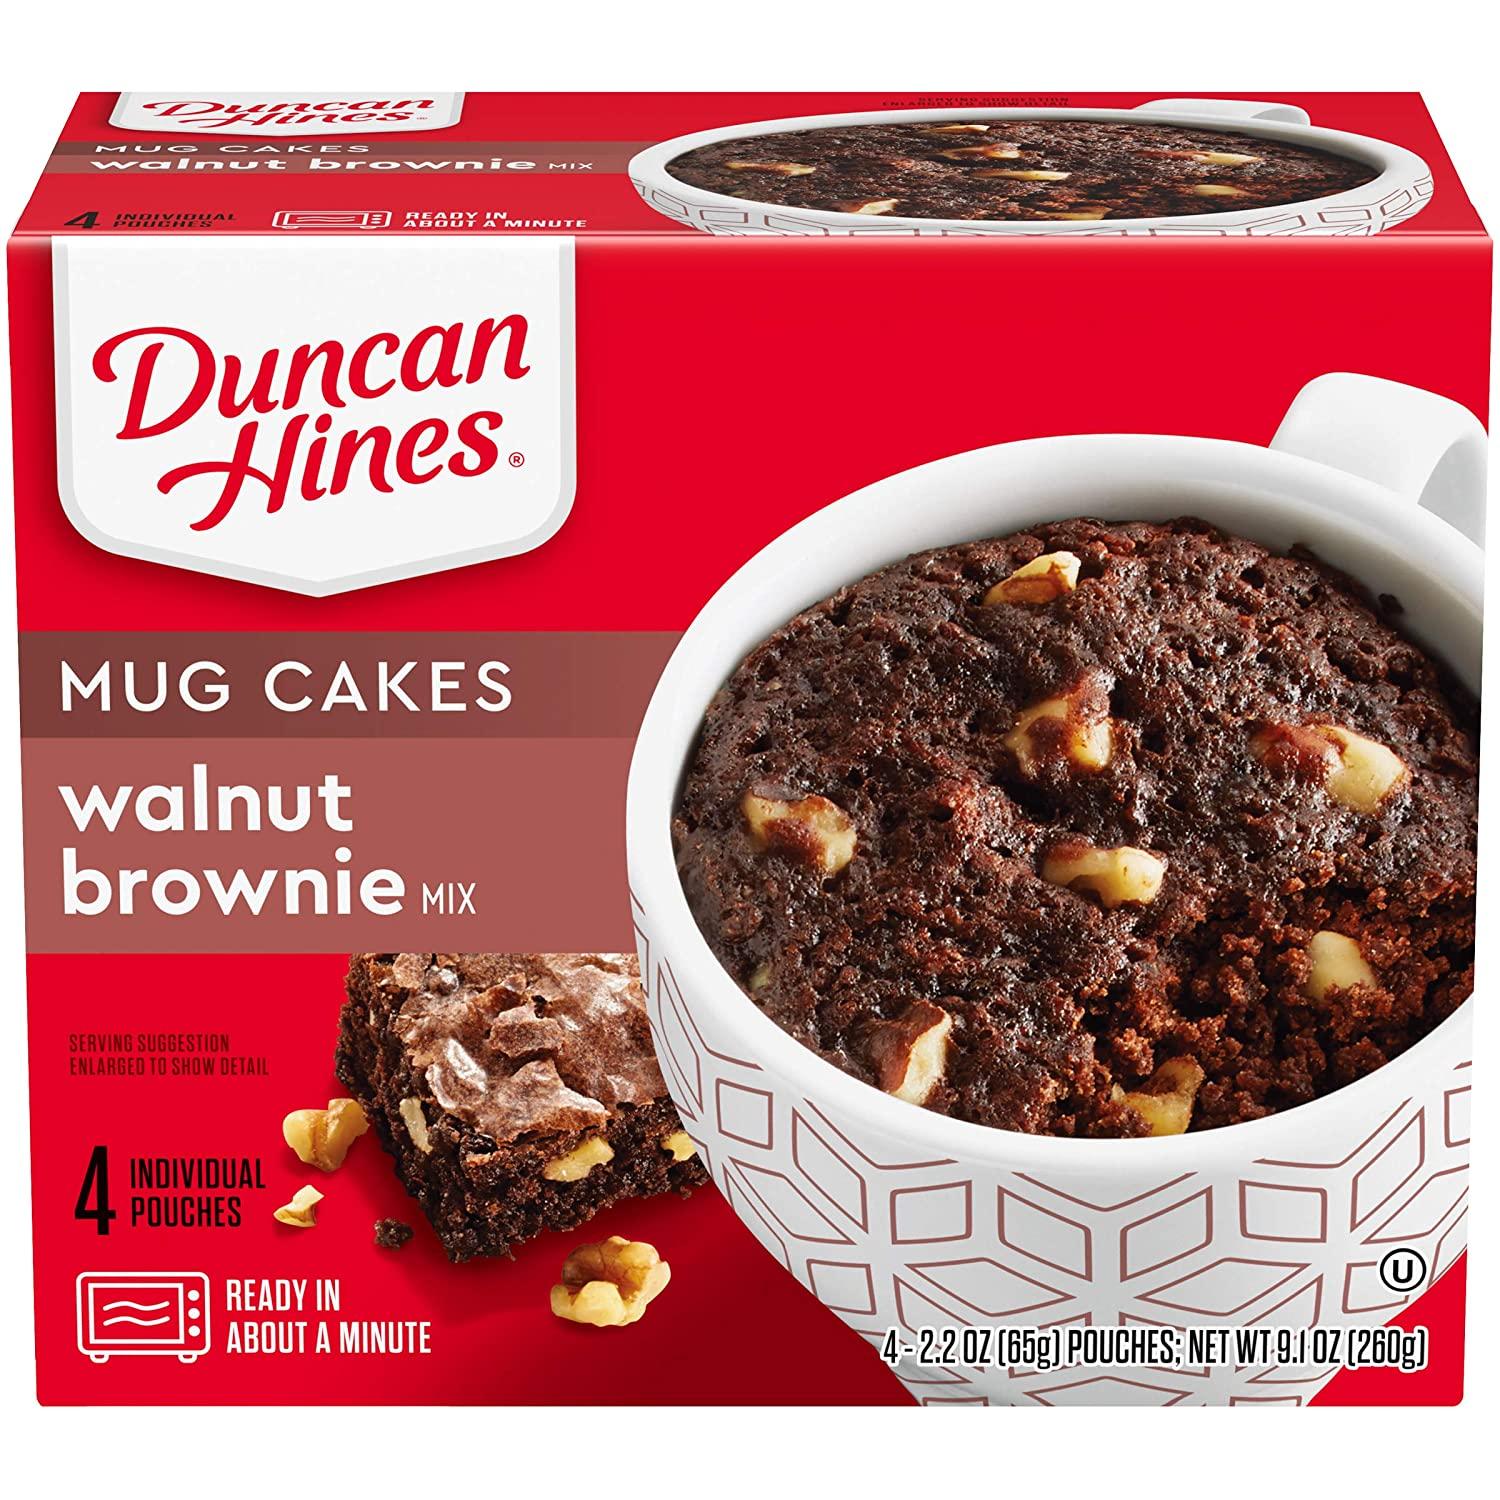 4 Duncan Hines Walnut Brownie Mug Cakes for $1.74 Shipped